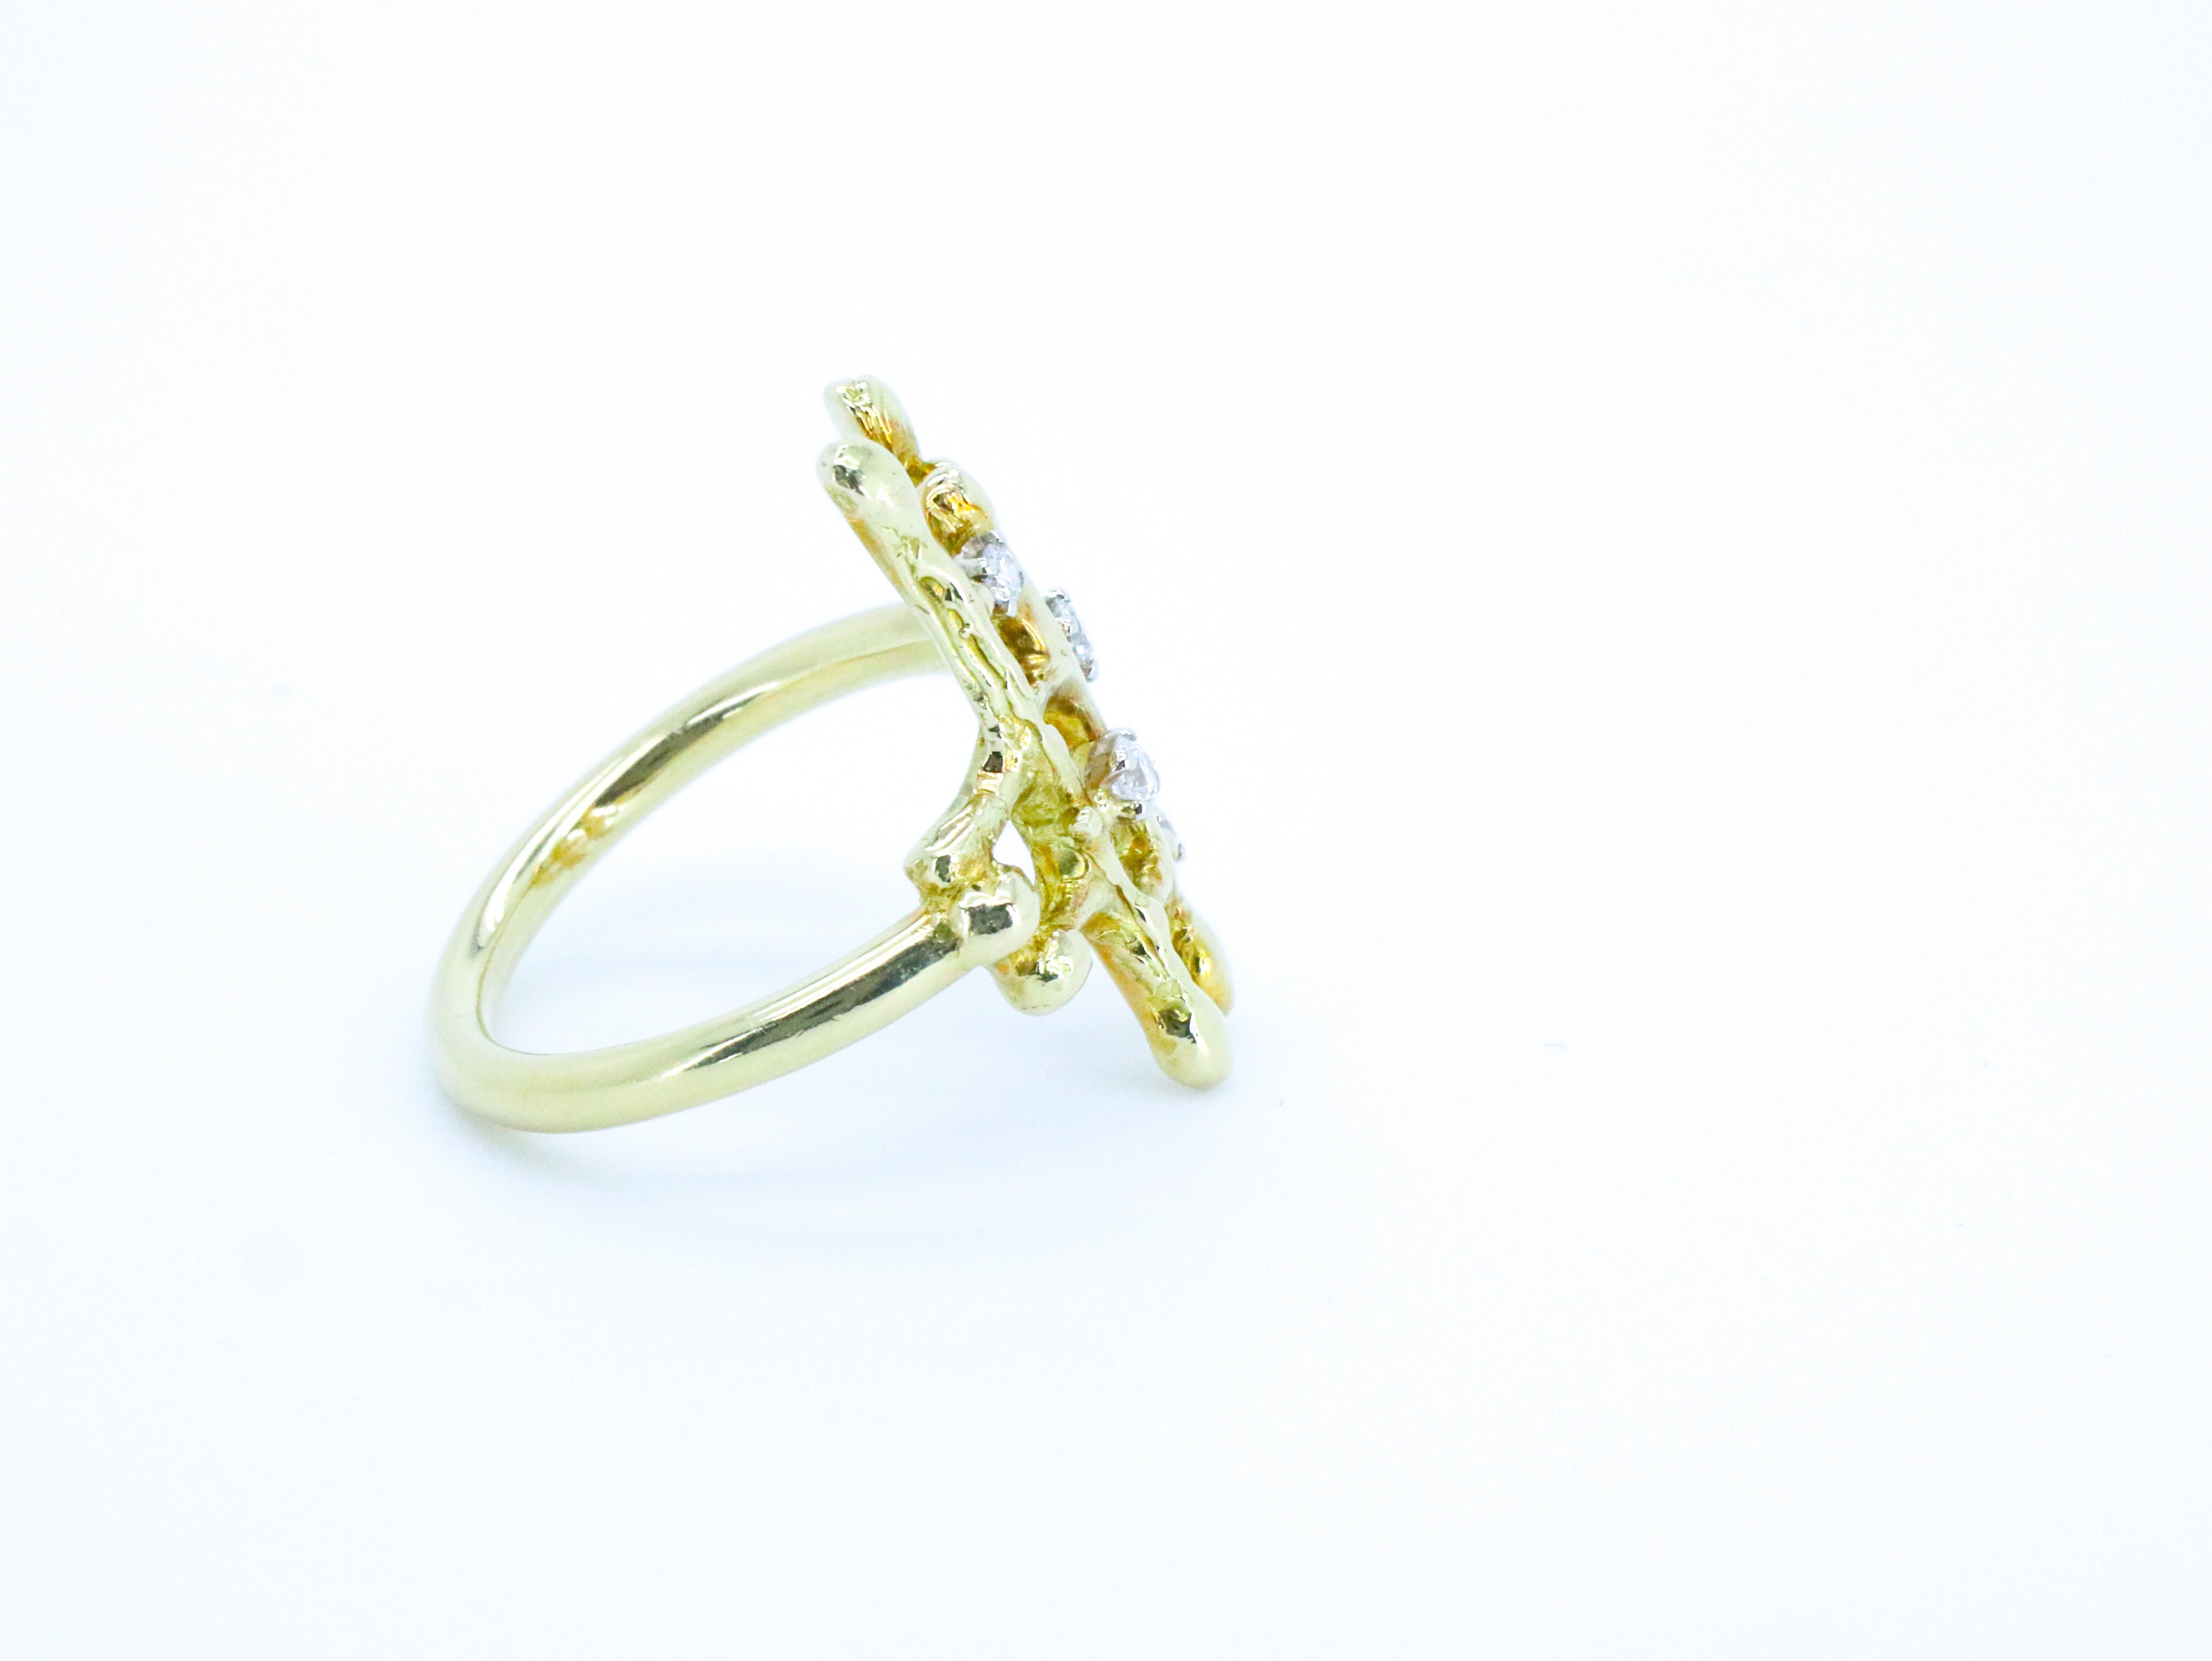 For Sale:  18K Yellow Gold Made in Italy Textured Grounding Diamond Cocktail Ring. 8